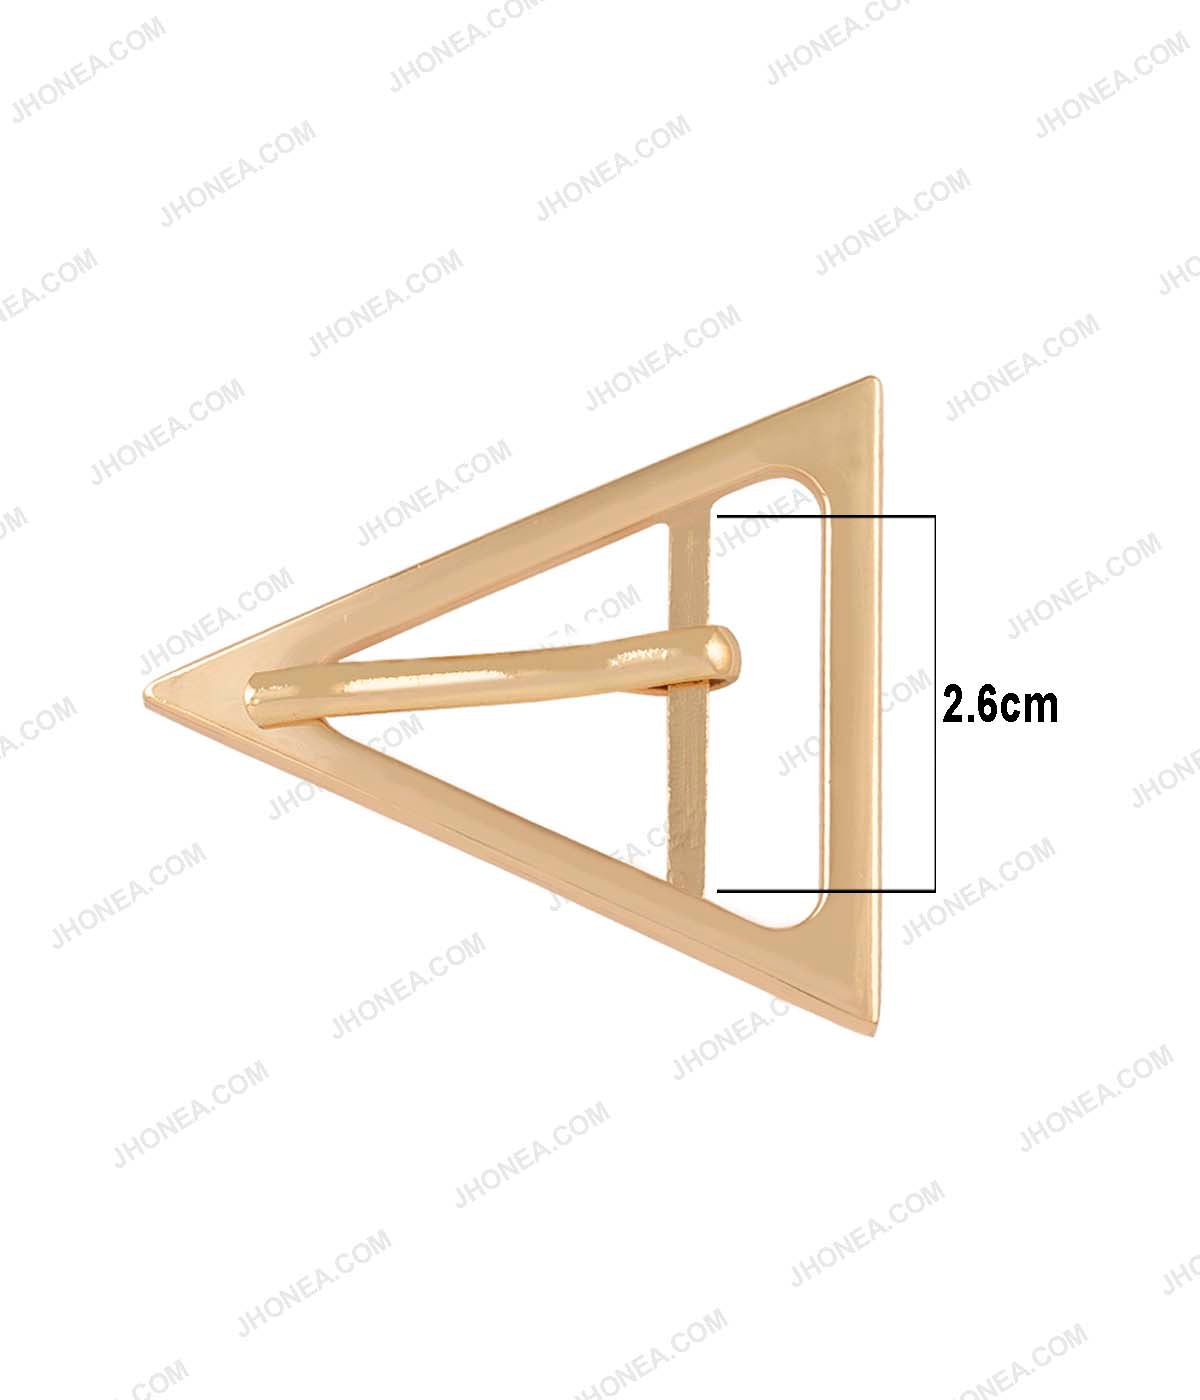 Triangle Geometric Structure Prong Belt Buckle in Shiny Gold Colour for Western Dresses